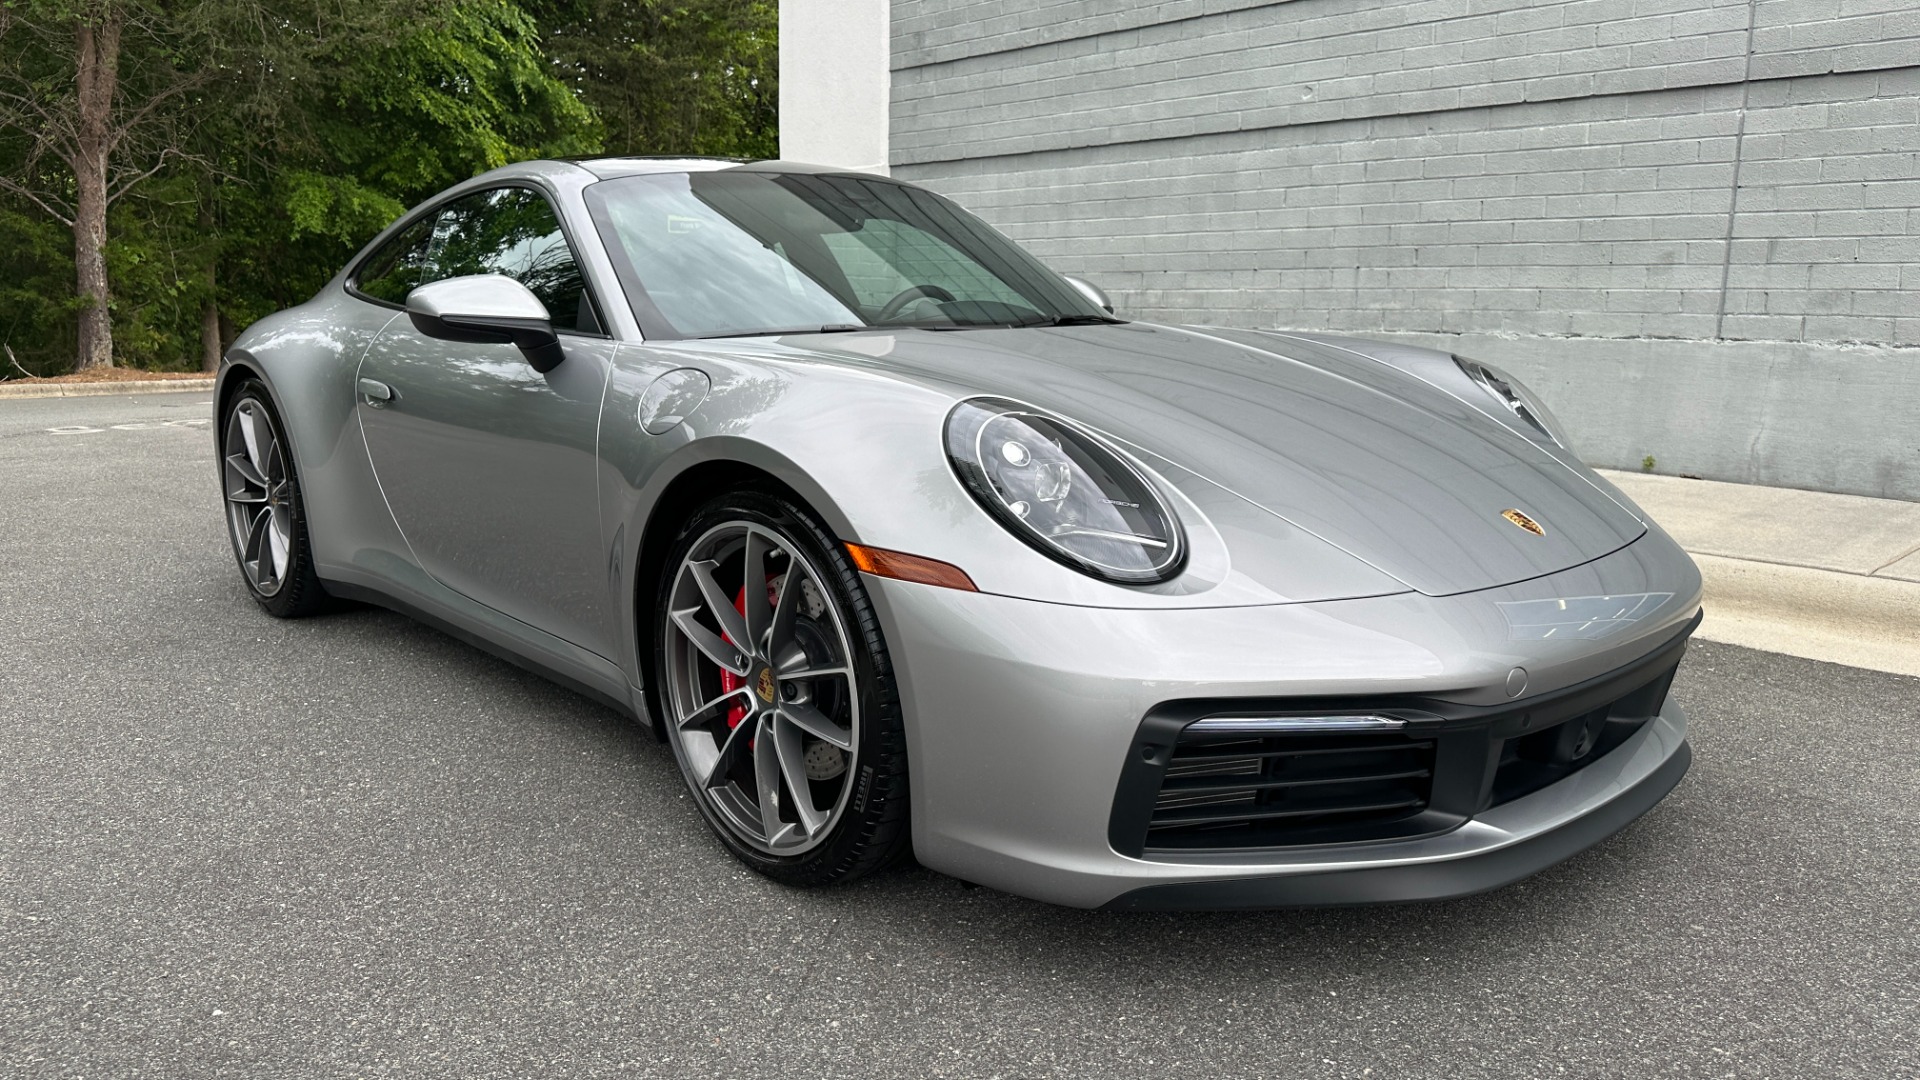 Used 2020 Porsche 911 CARRERA 4S / SPORT PACKAGE / PDLS+ LIGHTS / BOSE / SPORT EXHAUST for sale $144,995 at Formula Imports in Charlotte NC 28227 6